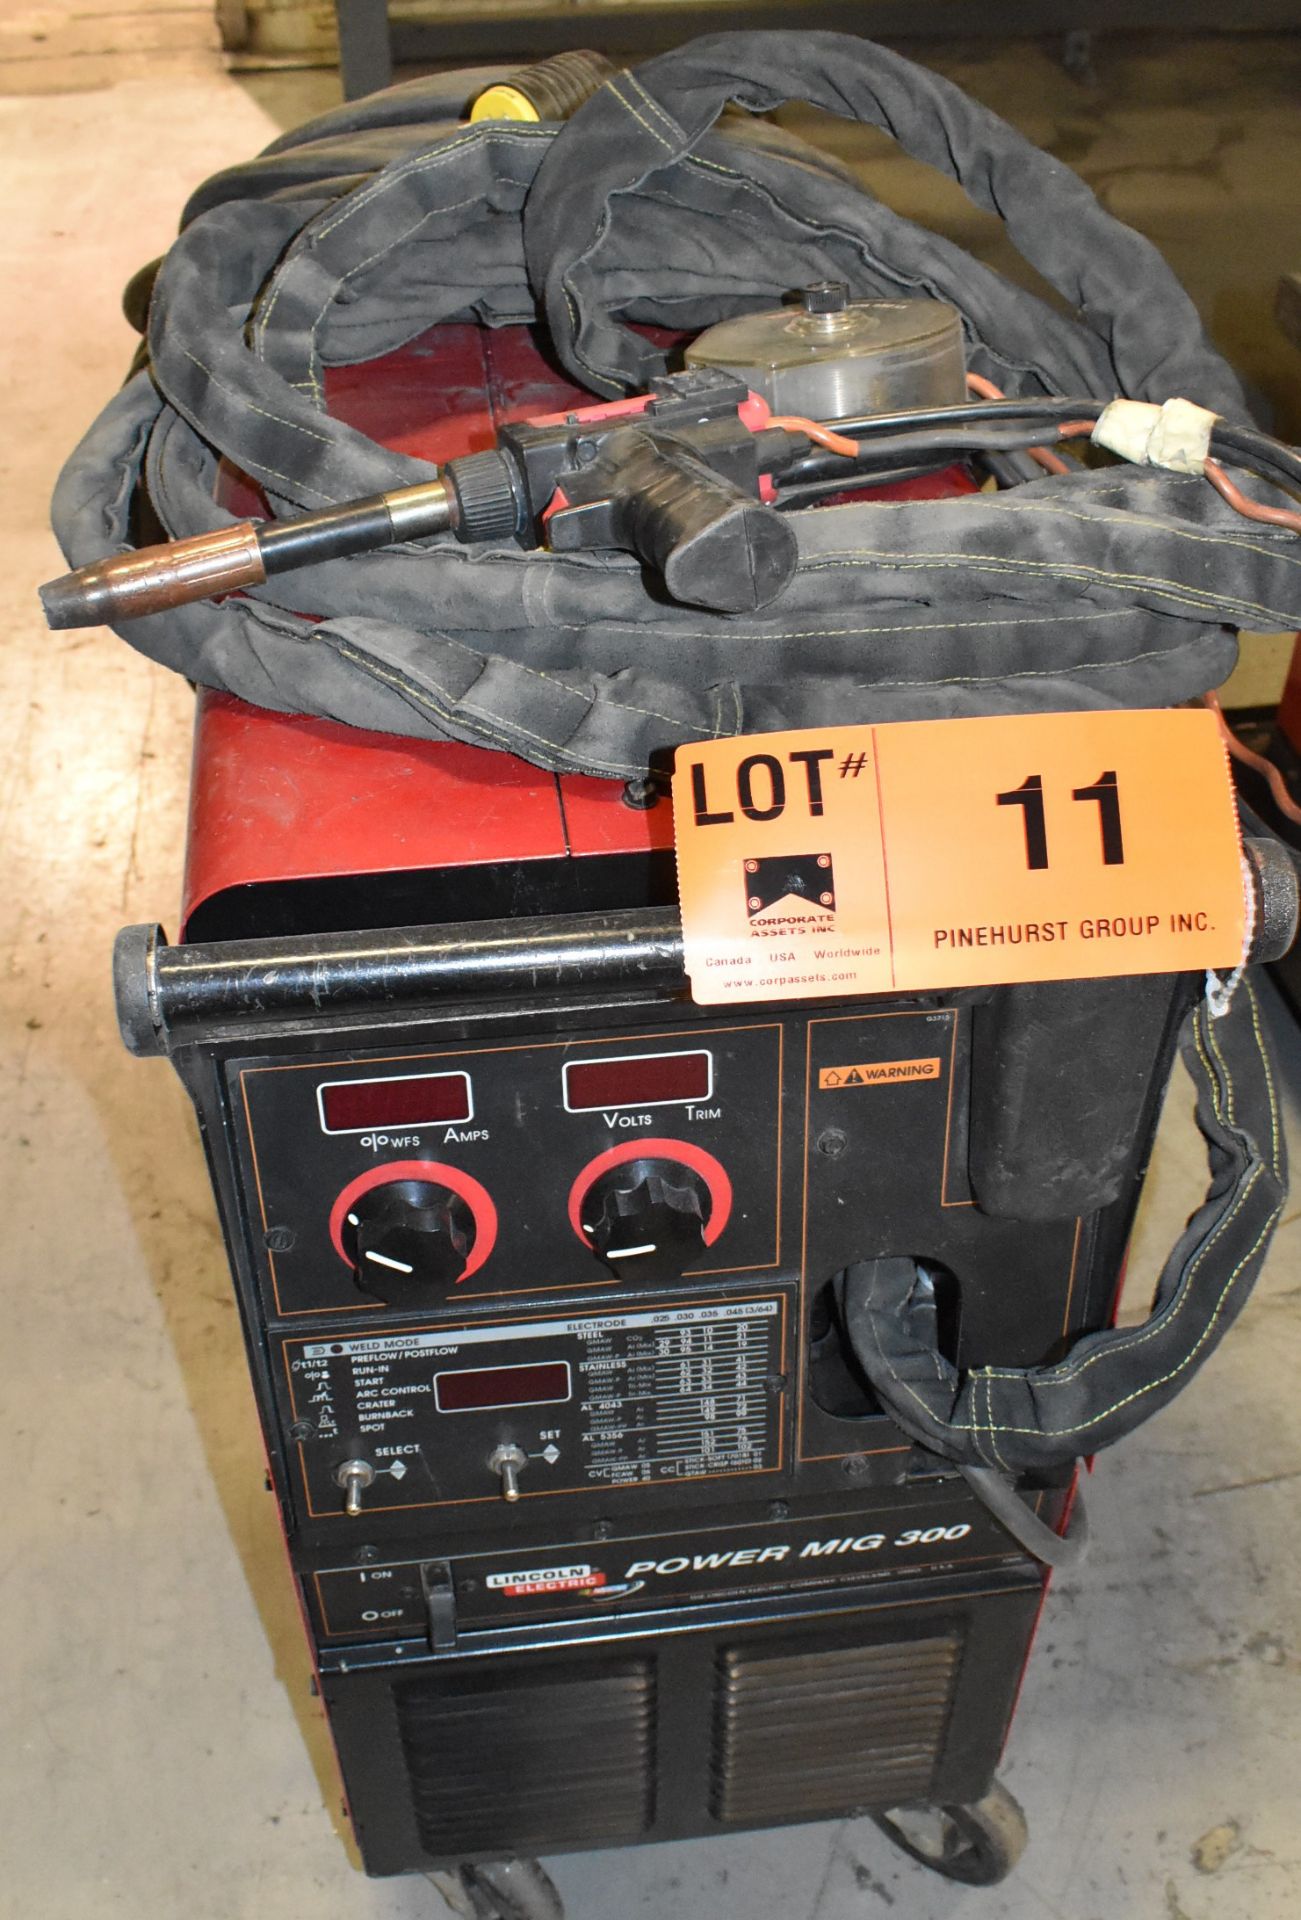 LINCOLN ELECTRIC POWER MIG 300 PORTABLE MIG WELDER WITH CABLES & GUN, S/N: U1031100735 [RIGGING FEES - Image 2 of 3